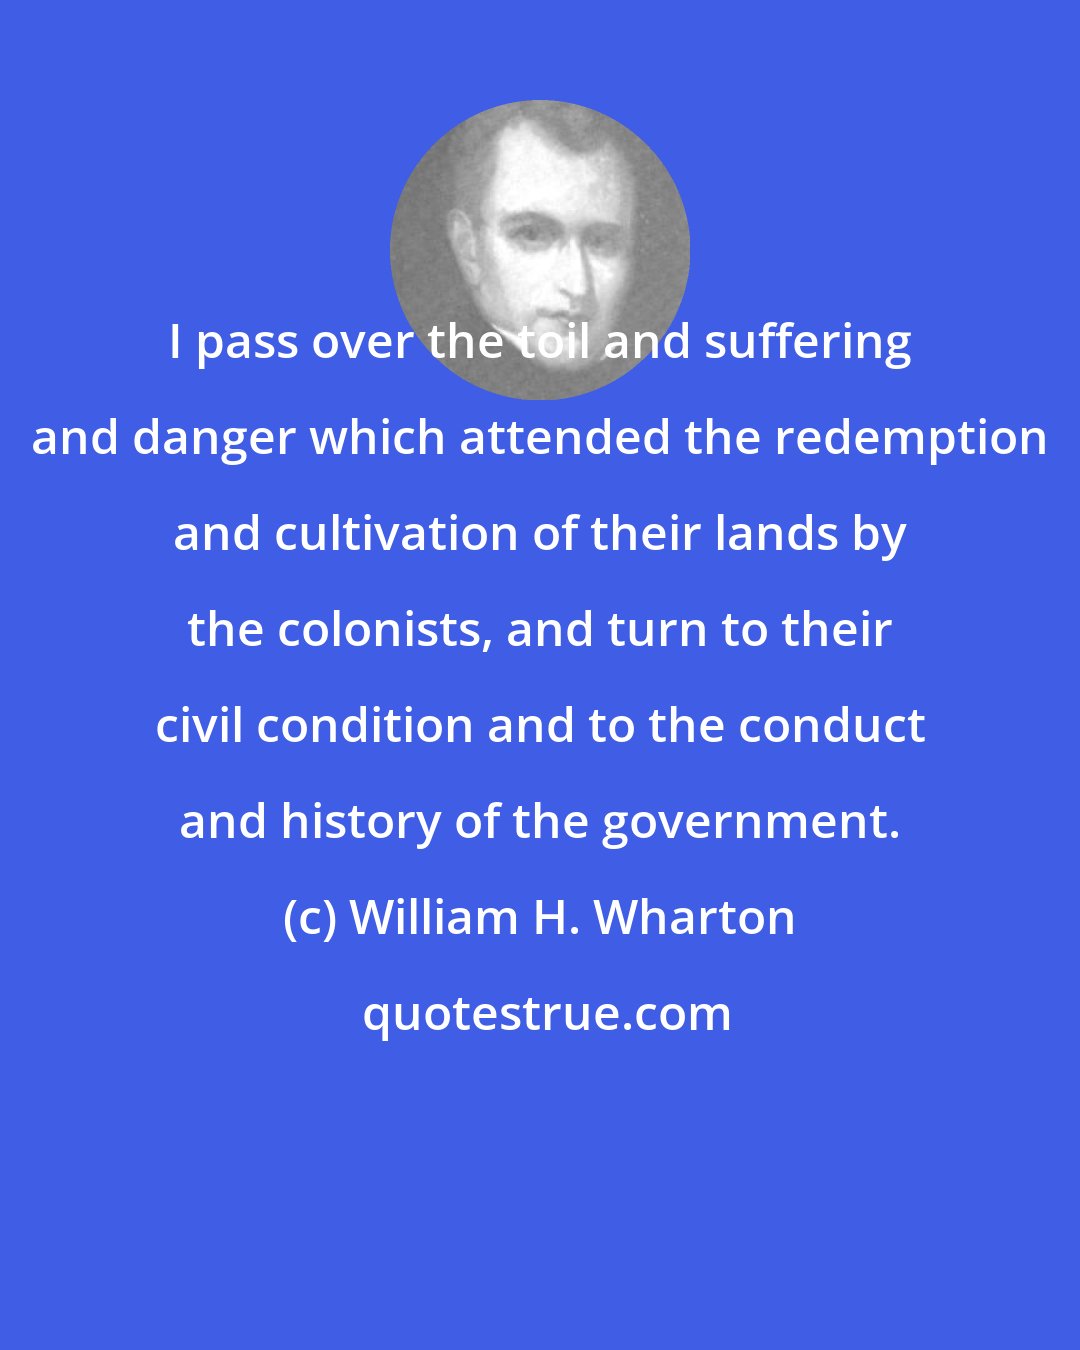 William H. Wharton: I pass over the toil and suffering and danger which attended the redemption and cultivation of their lands by the colonists, and turn to their civil condition and to the conduct and history of the government.